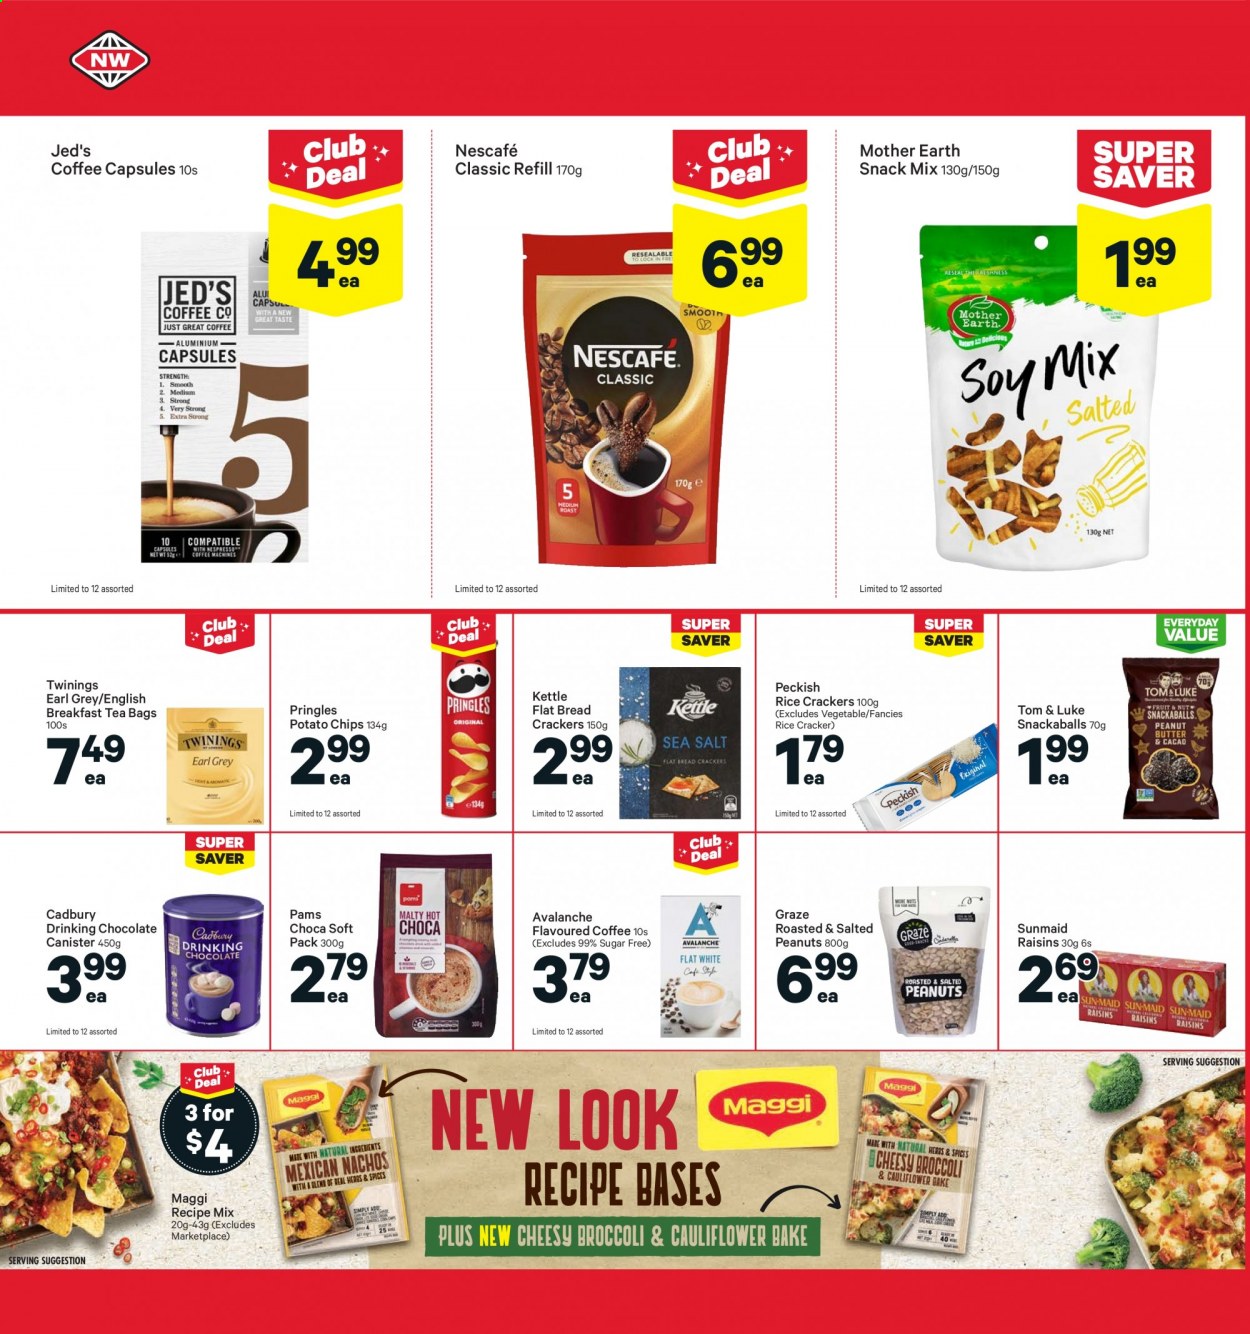 thumbnail - New World mailer - 23.08.2021 - 29.08.2021 - Sales products - bread, broccoli, chocolate, snack, crackers, Cadbury, Mother Earth, potato chips, Pringles, chips, rice crackers, Maggi, raisins, peanuts, dried fruit, Graze, hot chocolate, tea bags, Twinings, coffee, Nescafé, coffee capsules. Page 18.